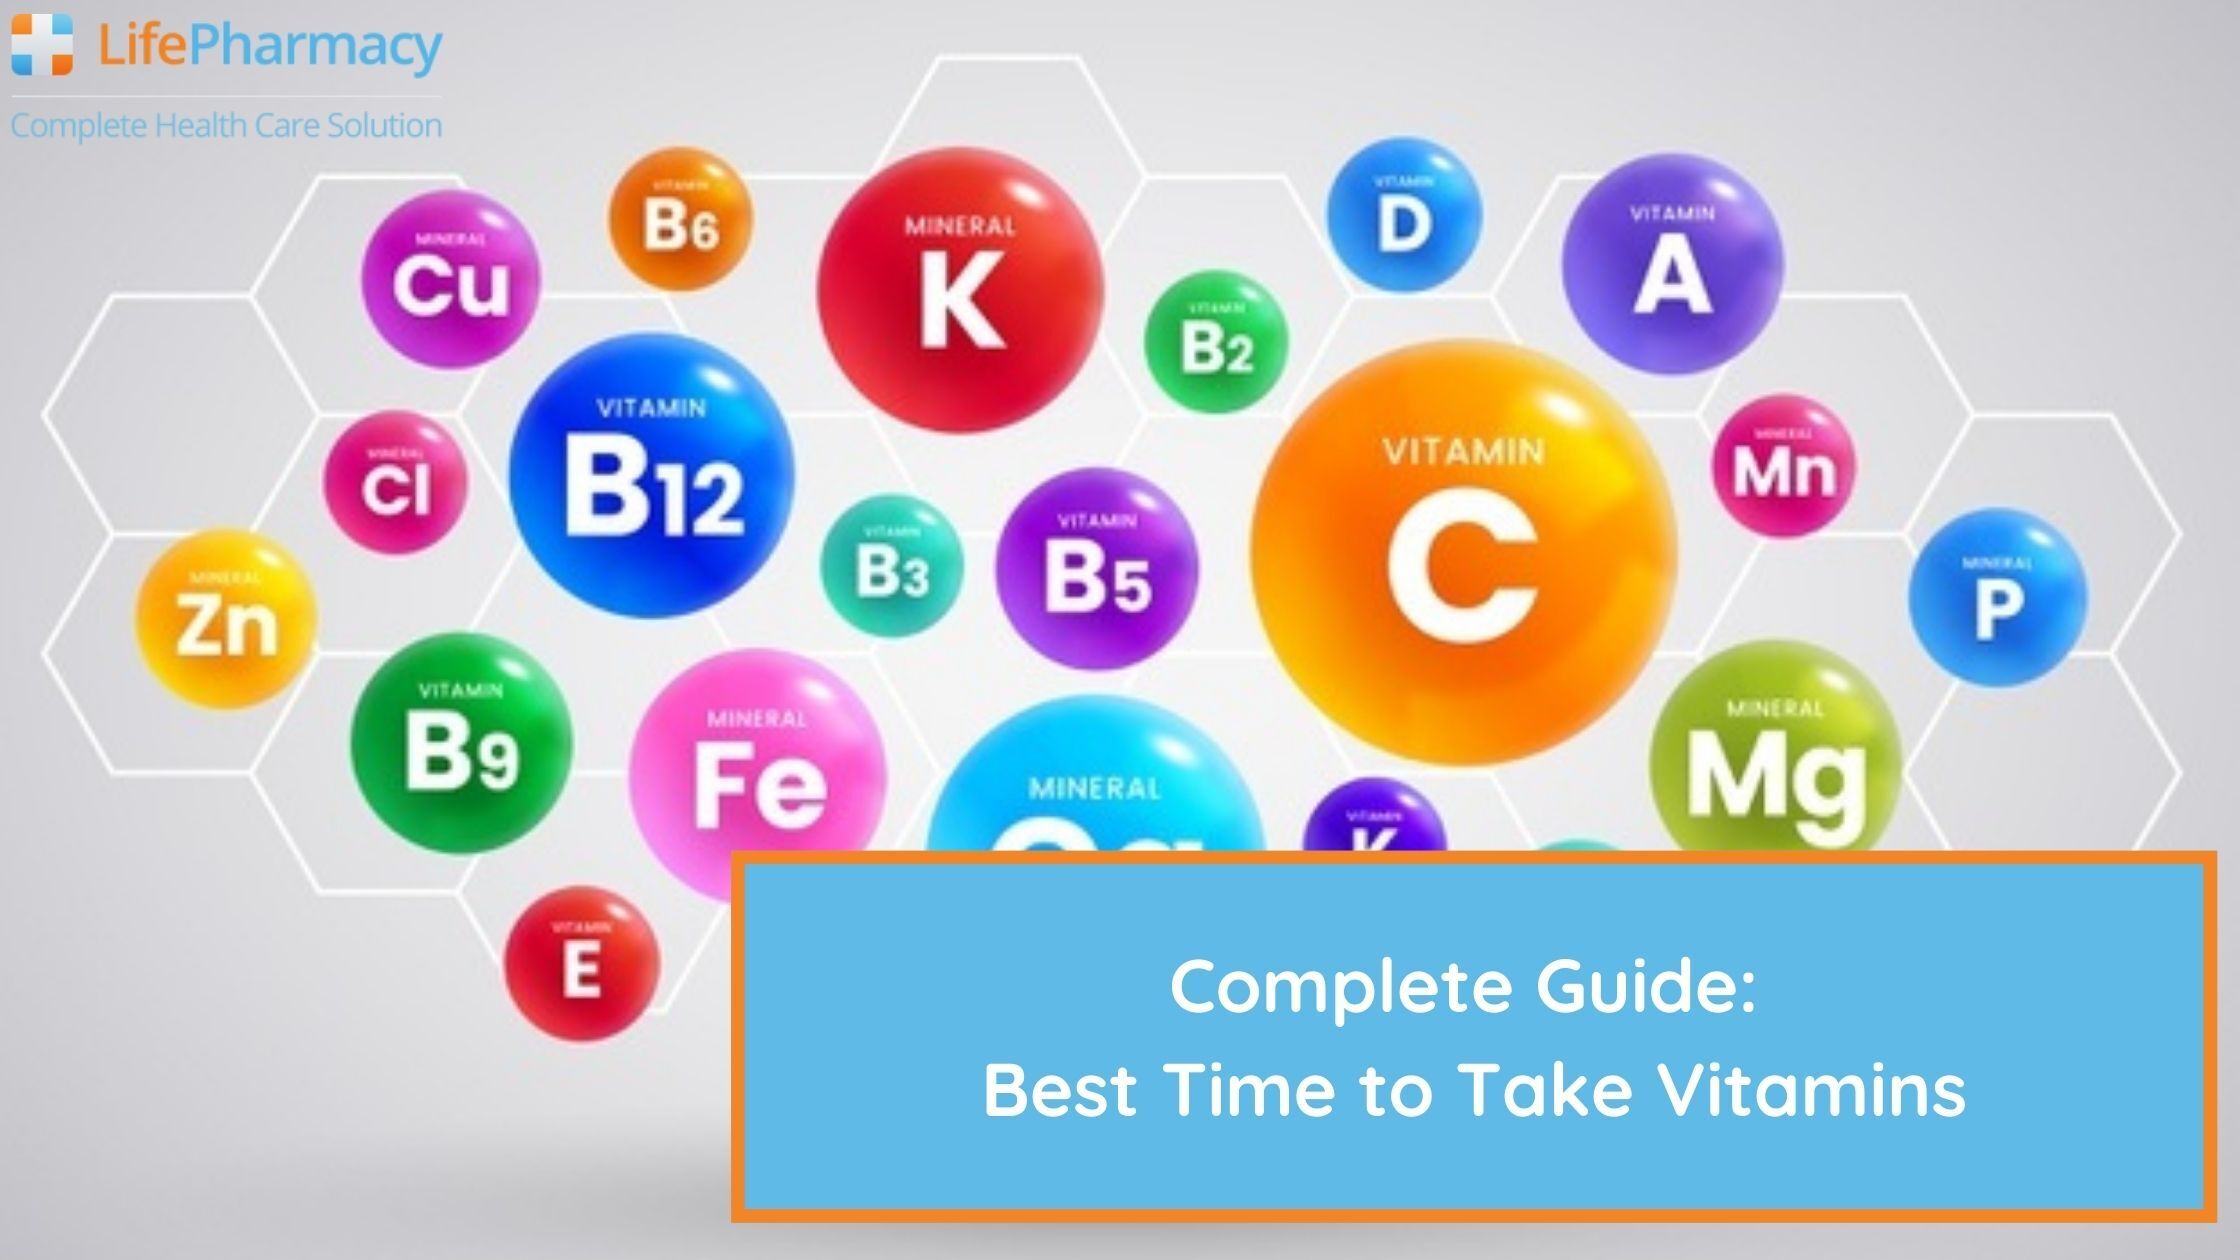 Complete Guide: Best Time to Take Vitamins